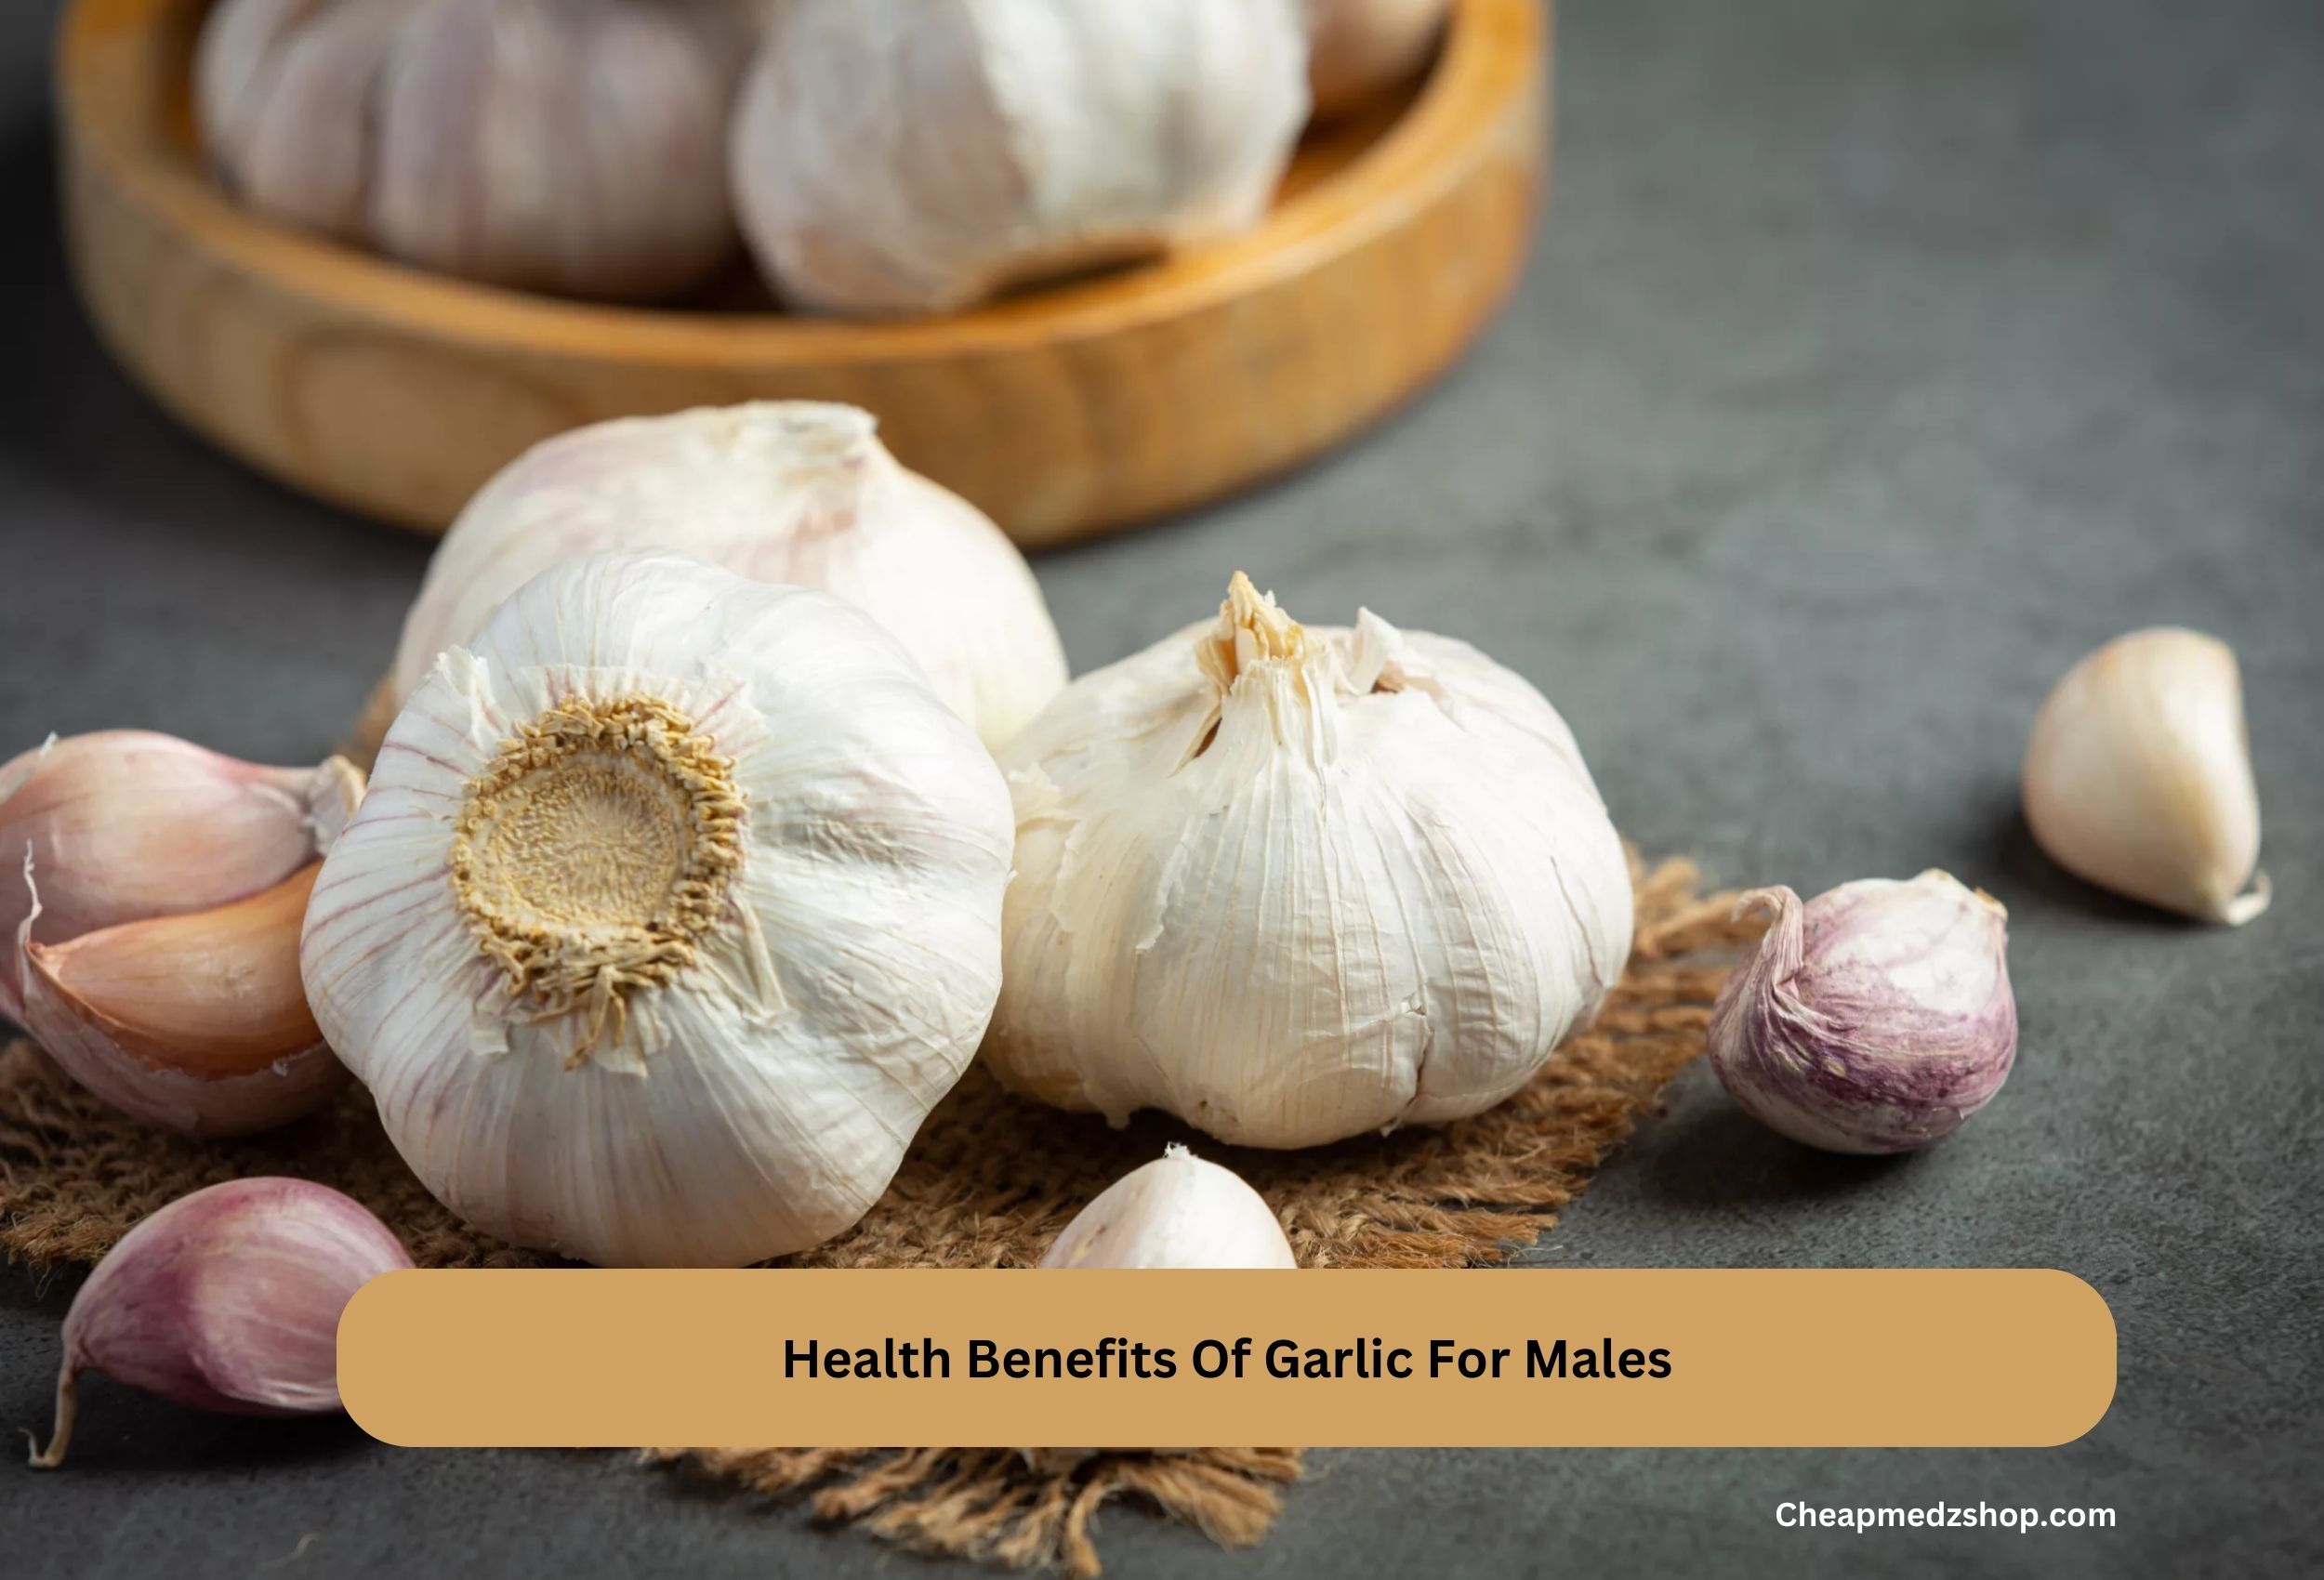 Health Benefits Of Garlic For Males